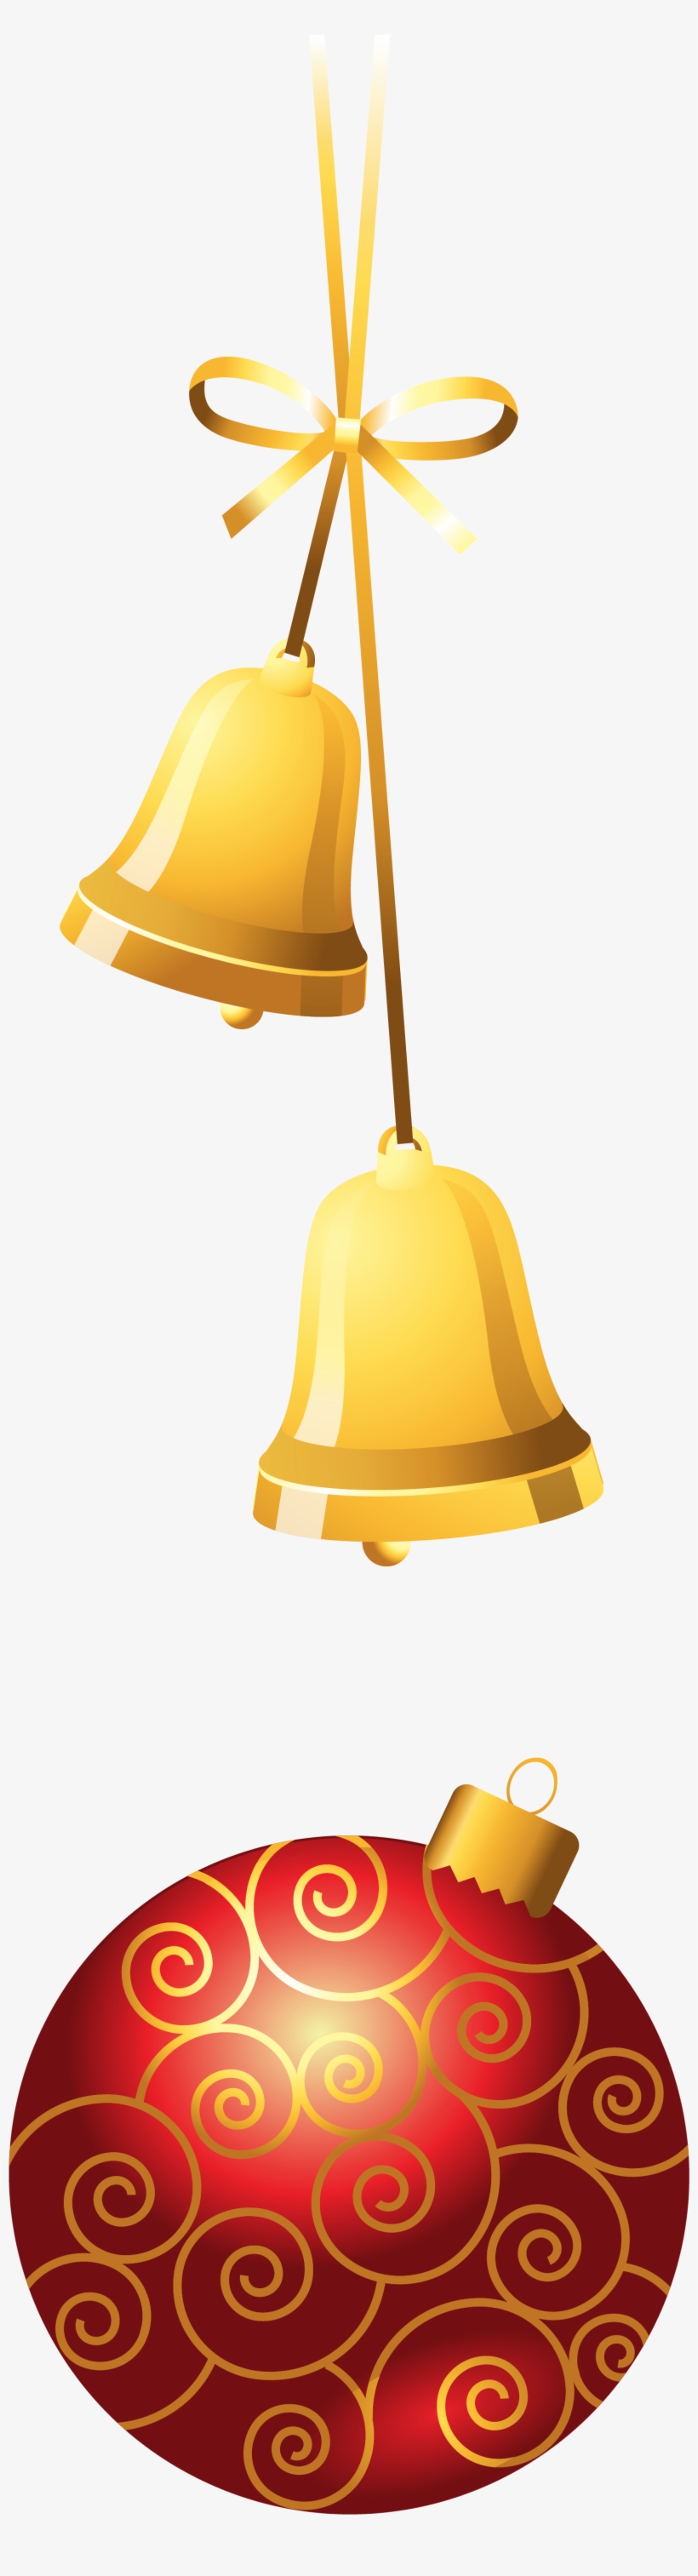 Silver Bells PNG Transparent Clipart​  Gallery Yopriceville - High-Quality  Free Images and Transparent PNG Clipart